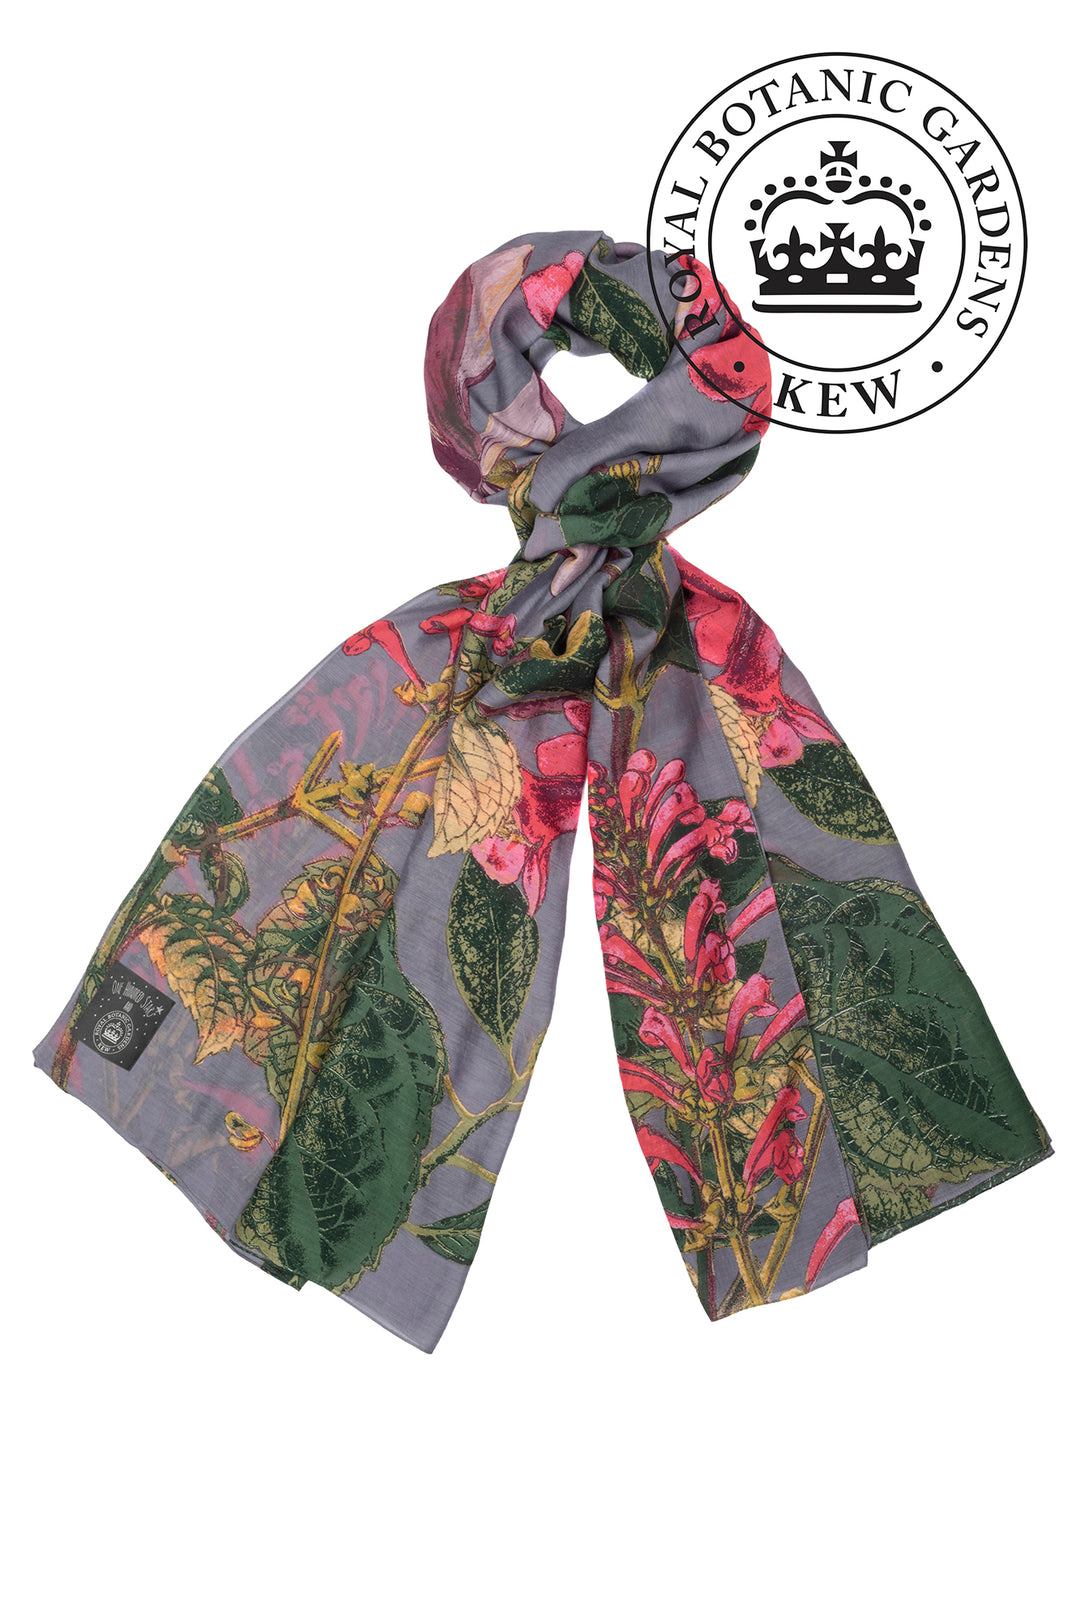 KEW Magnolia Grey Scarf- Our scarves are a full 100cm x 200cm making them perfect for layering in the winter months or worn as a delicate cover up during the summer seasons. 